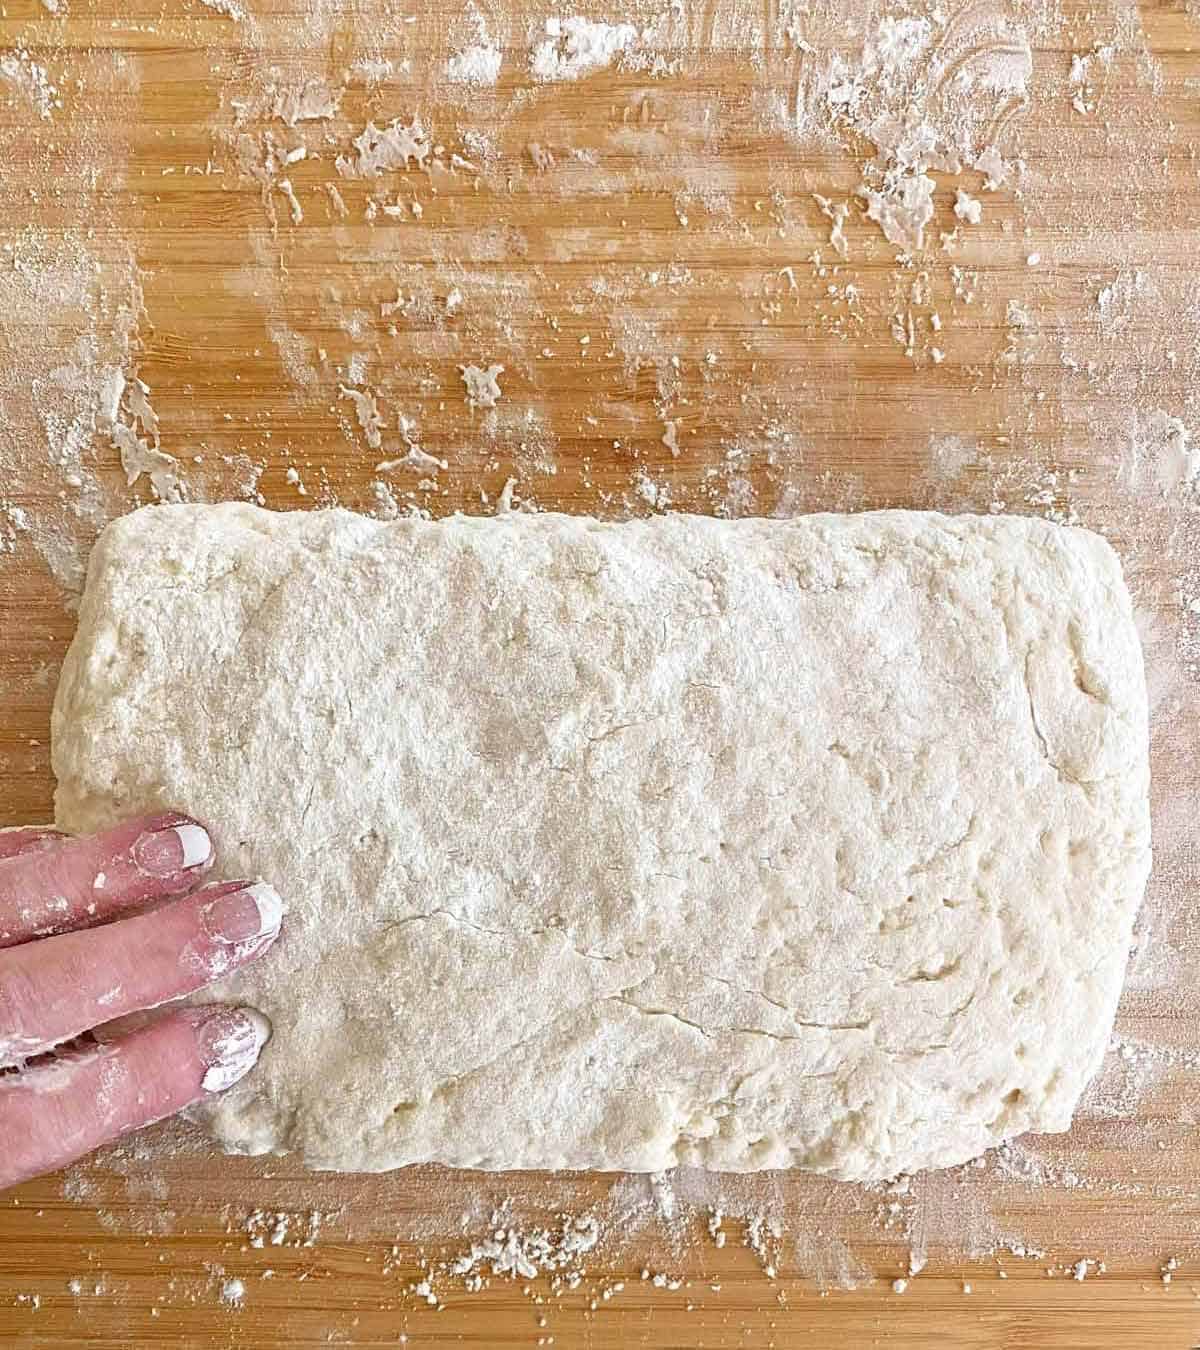 Folding biscuit dough in half from the top to the bottom.